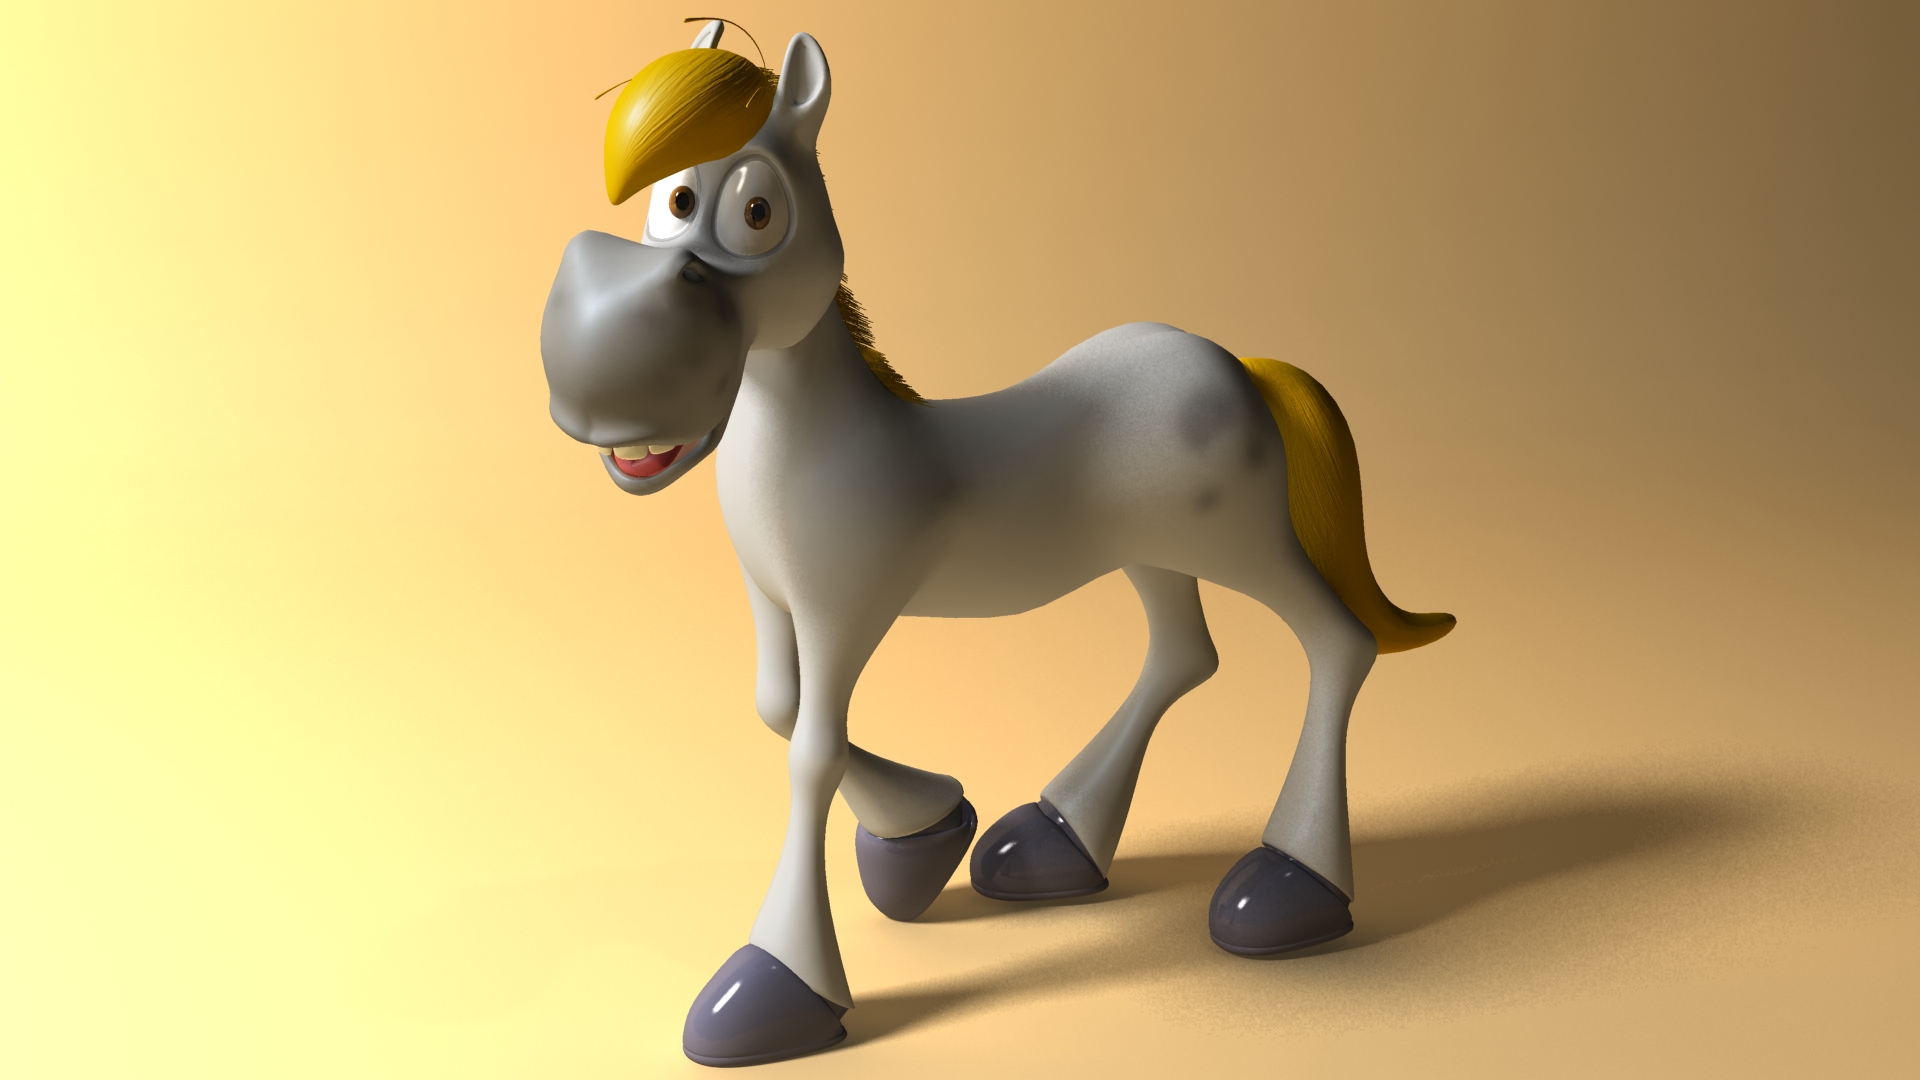 Cartoon horse d model by supercigale